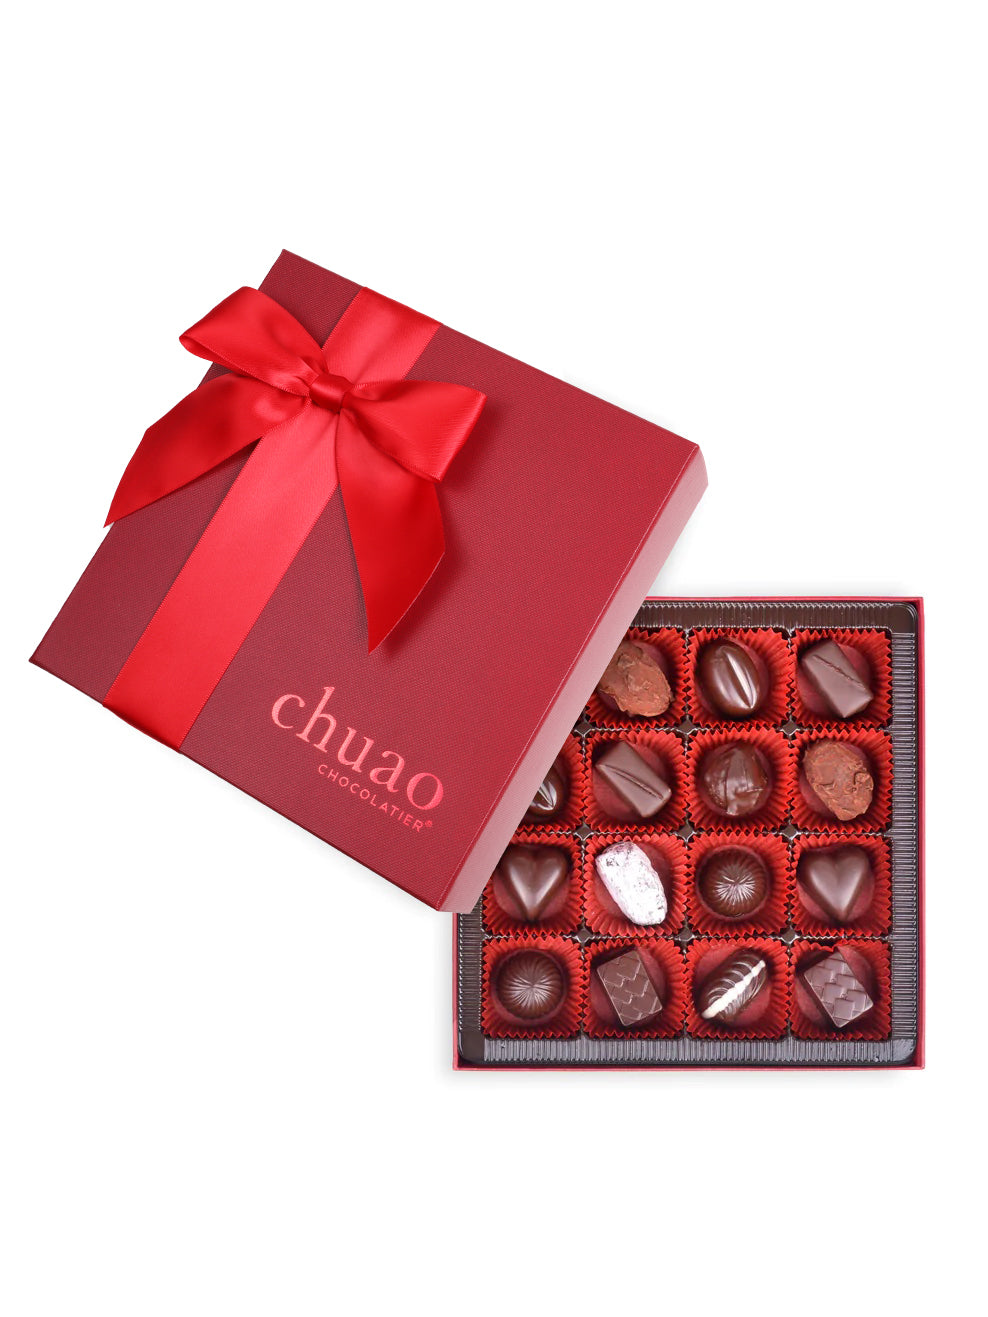 16 pieces of chocolate bonbons and truffles in a red gift box